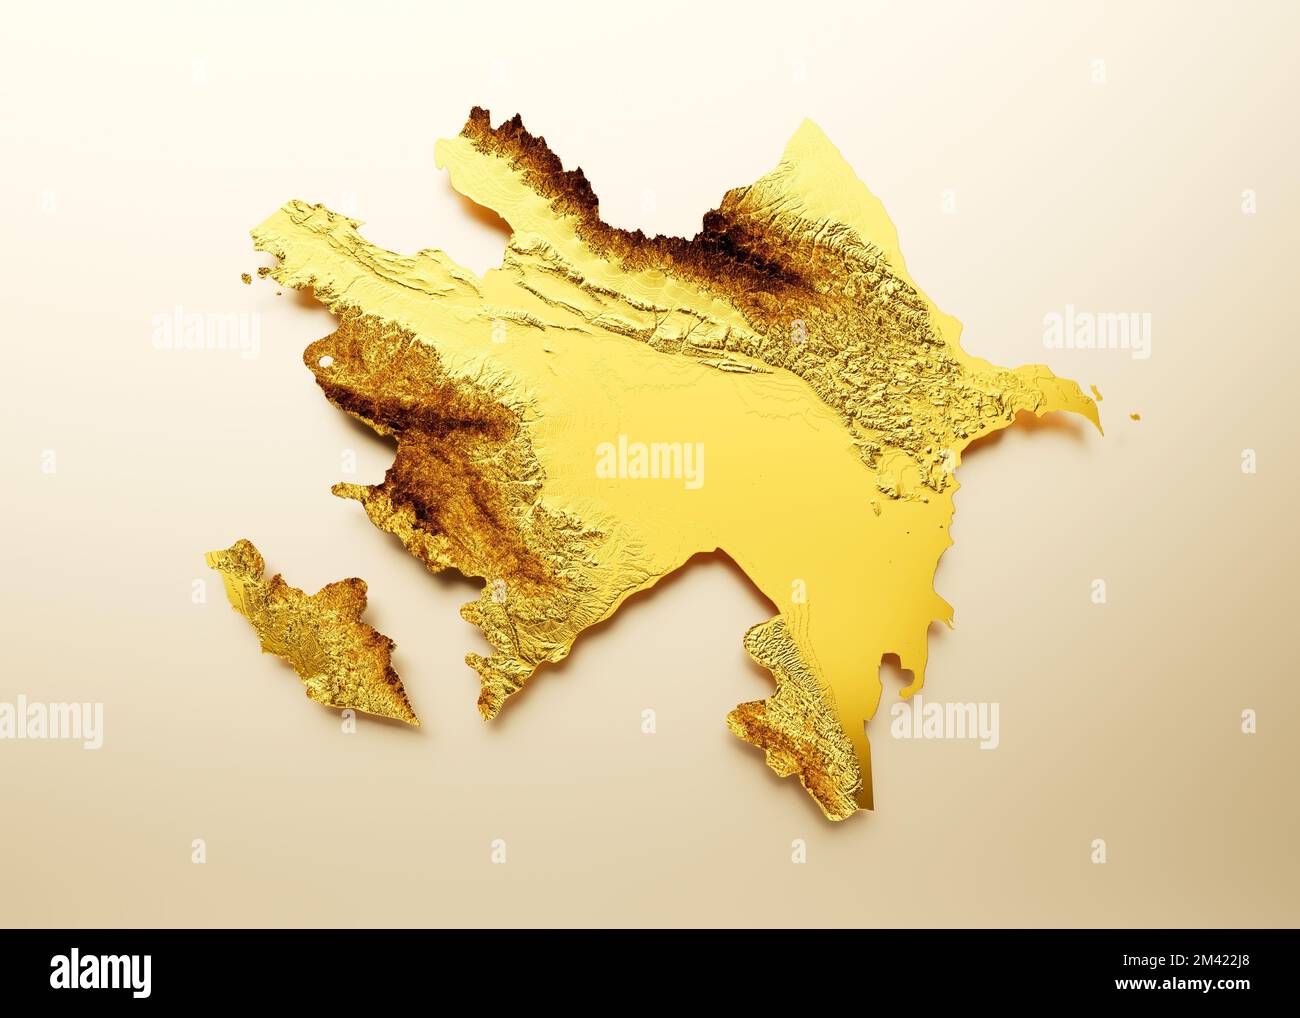 A 3D rendering of a topography map of Azerbaijan isolated on a golden background Stock Photo